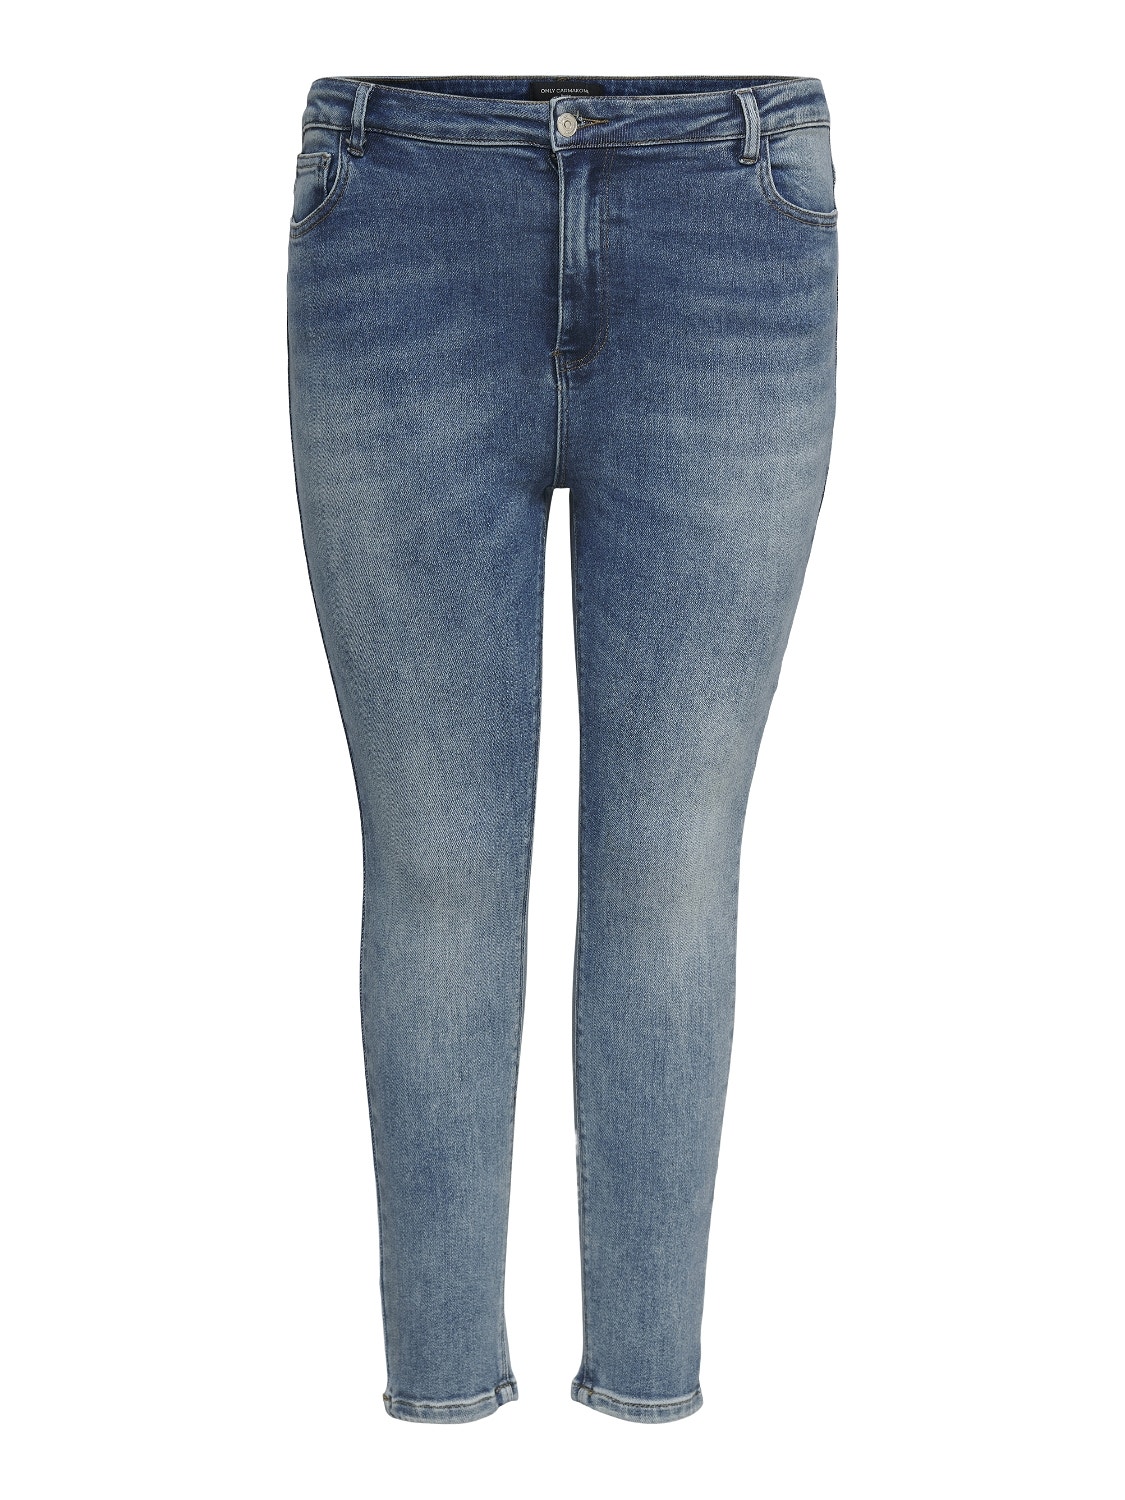 ONLY Skinny Fit Hohe Taille Jeans -Medium Blue Denim - 15247551